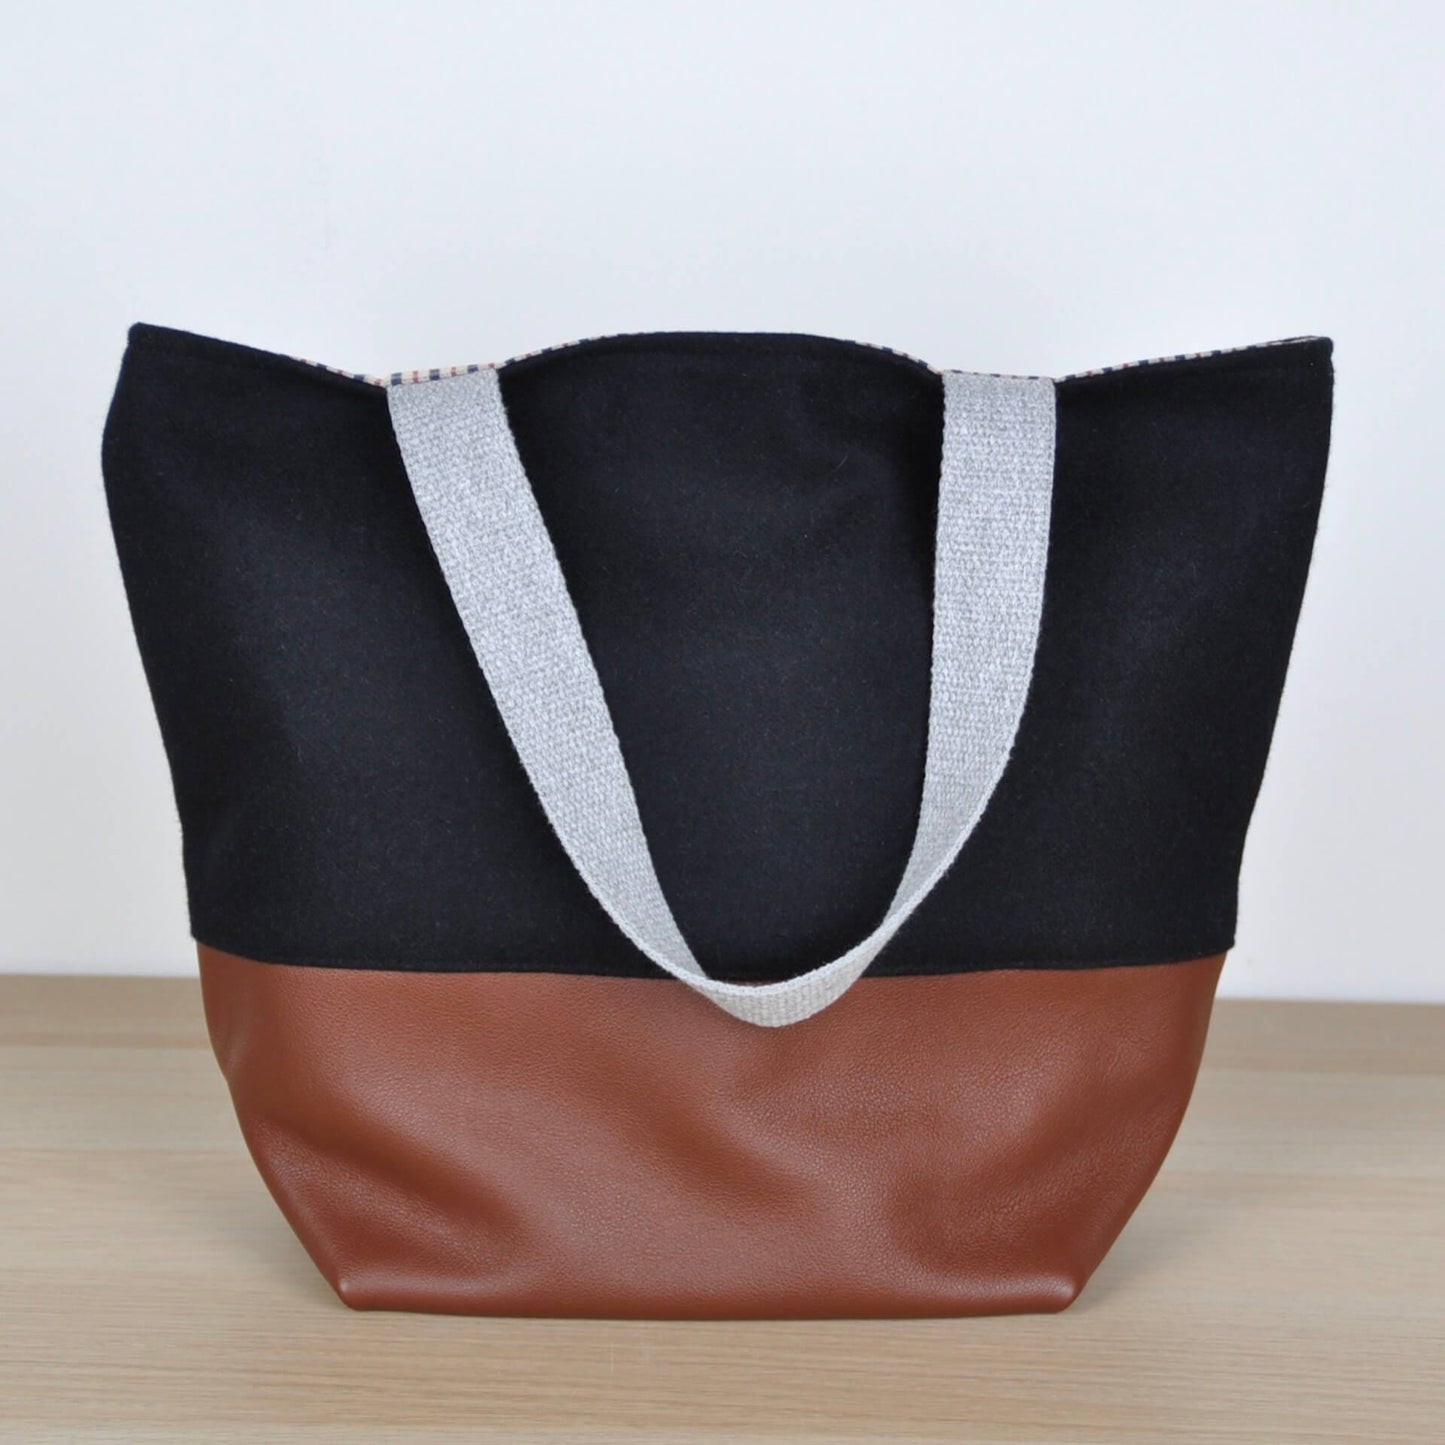 Bits & Totes Bag Mixed Fabric Bag - Midnight Blue Wool & Brown Leather